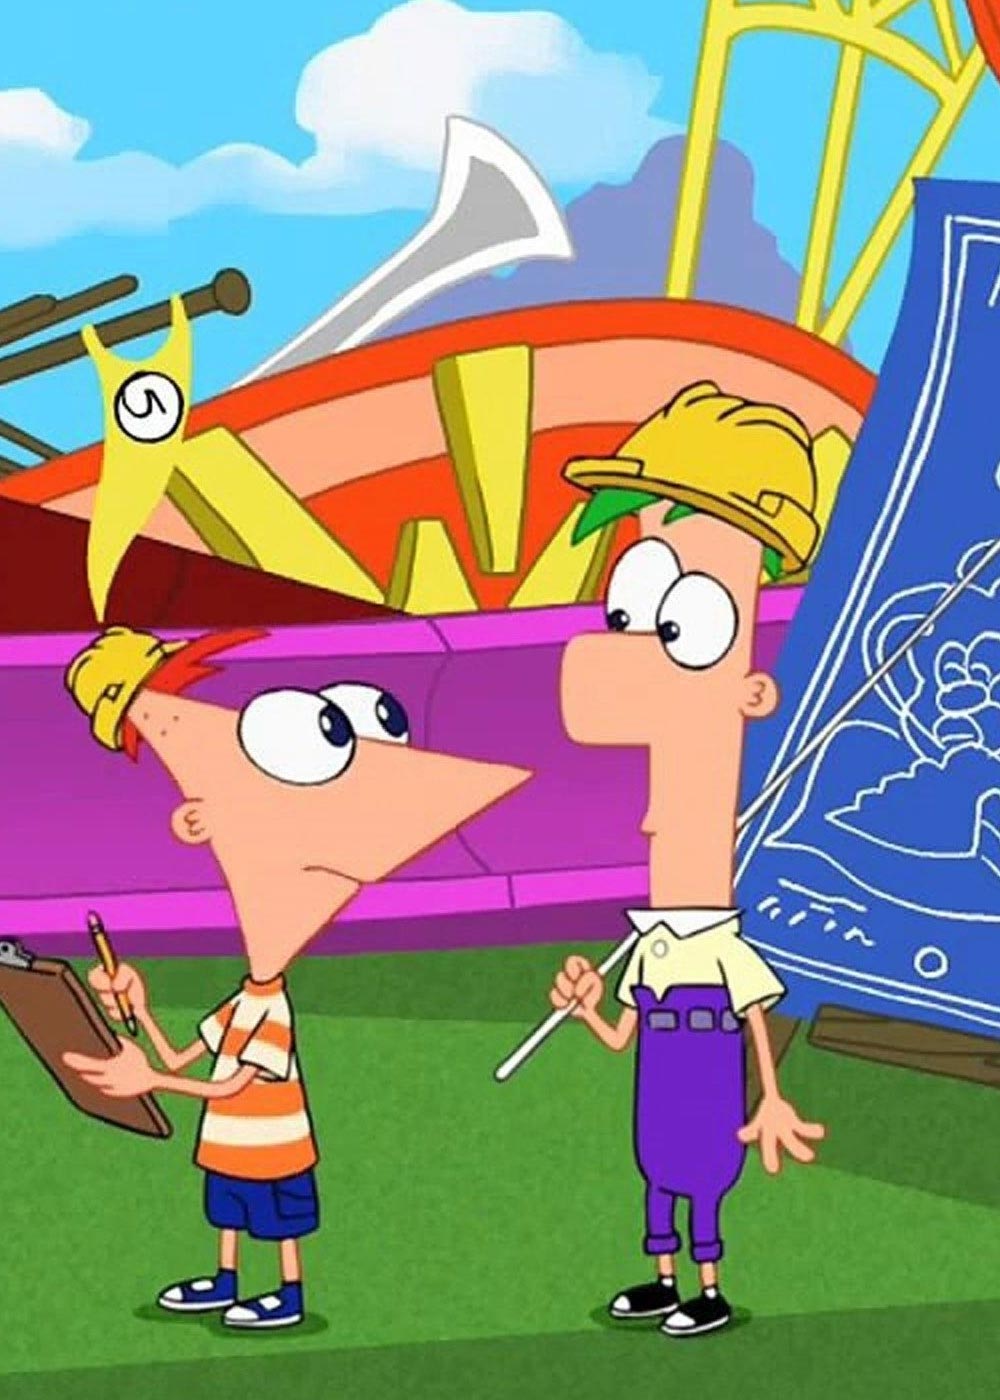 Phineas and Ferb Season 5